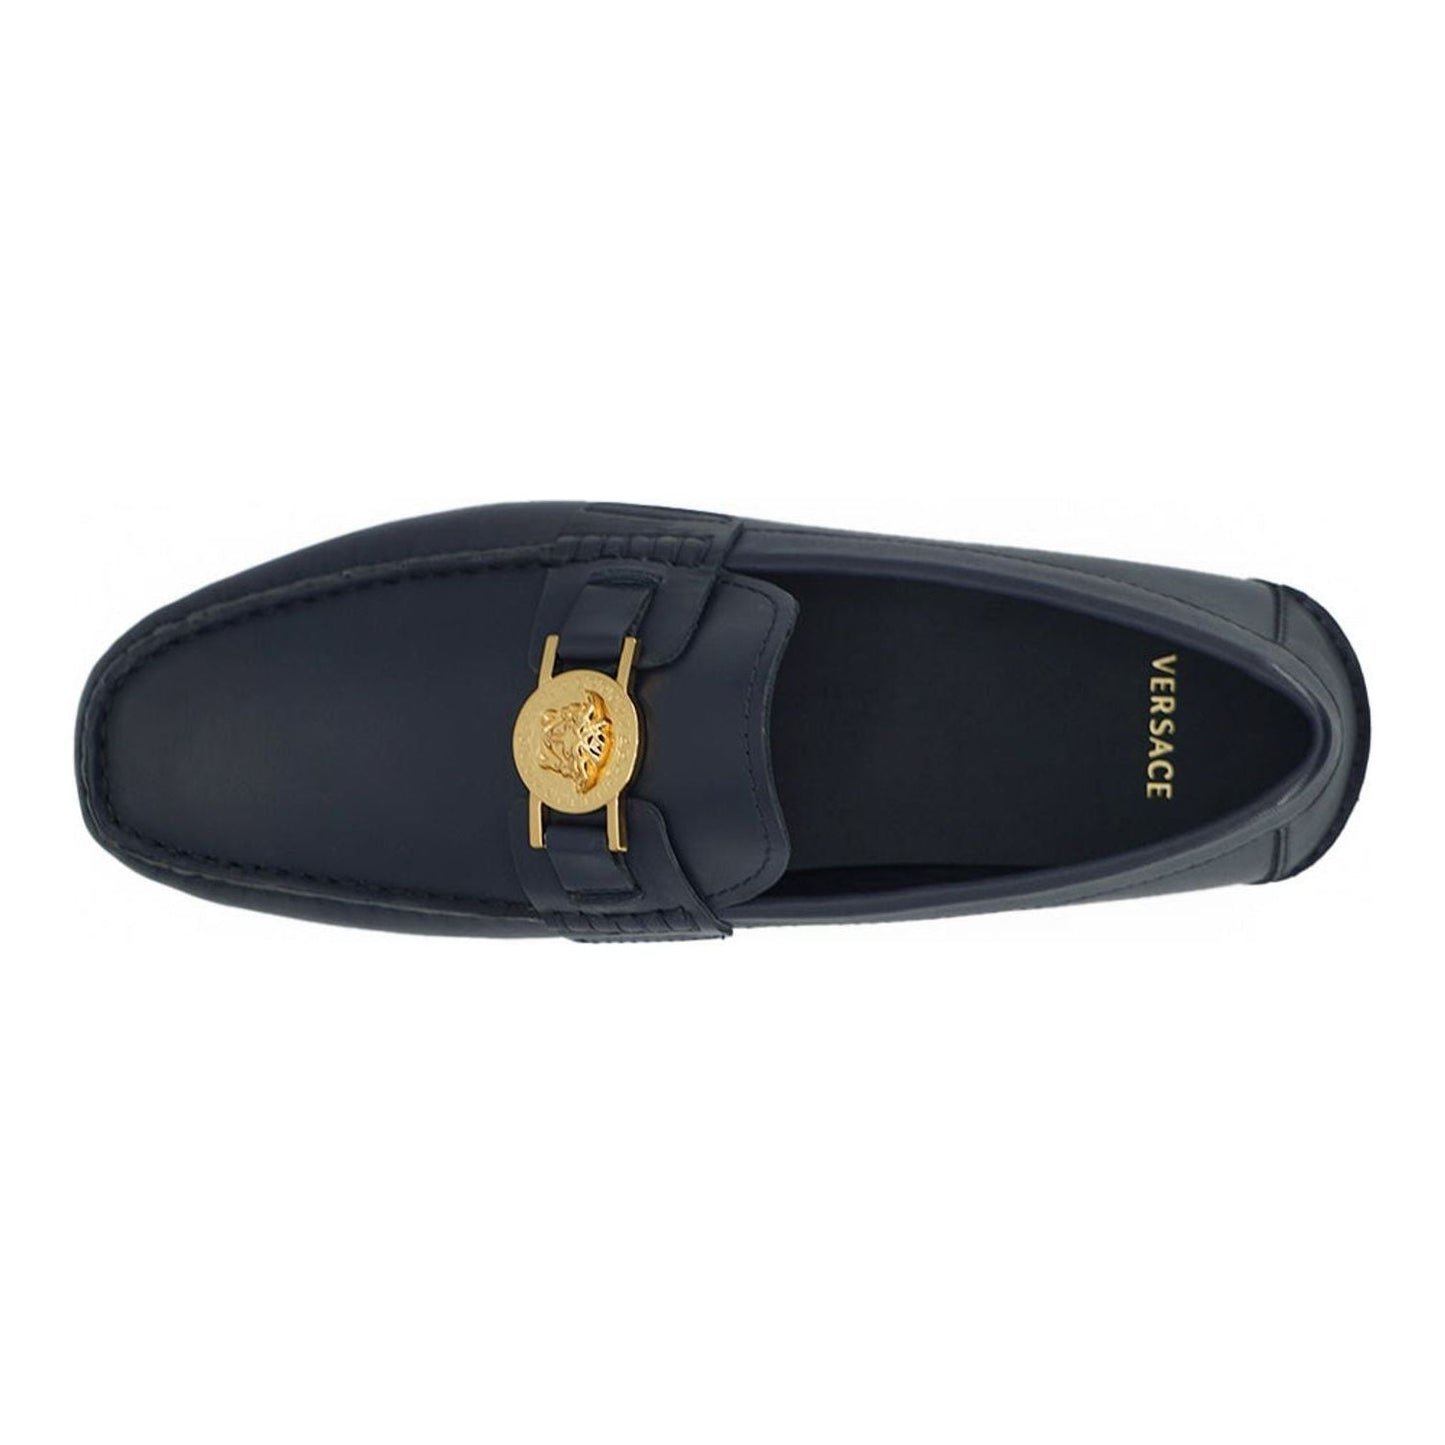 Versace Elegant Navy Blue Calf Leather Loafers navy-blue-calf-leather-loafers-shoes-1